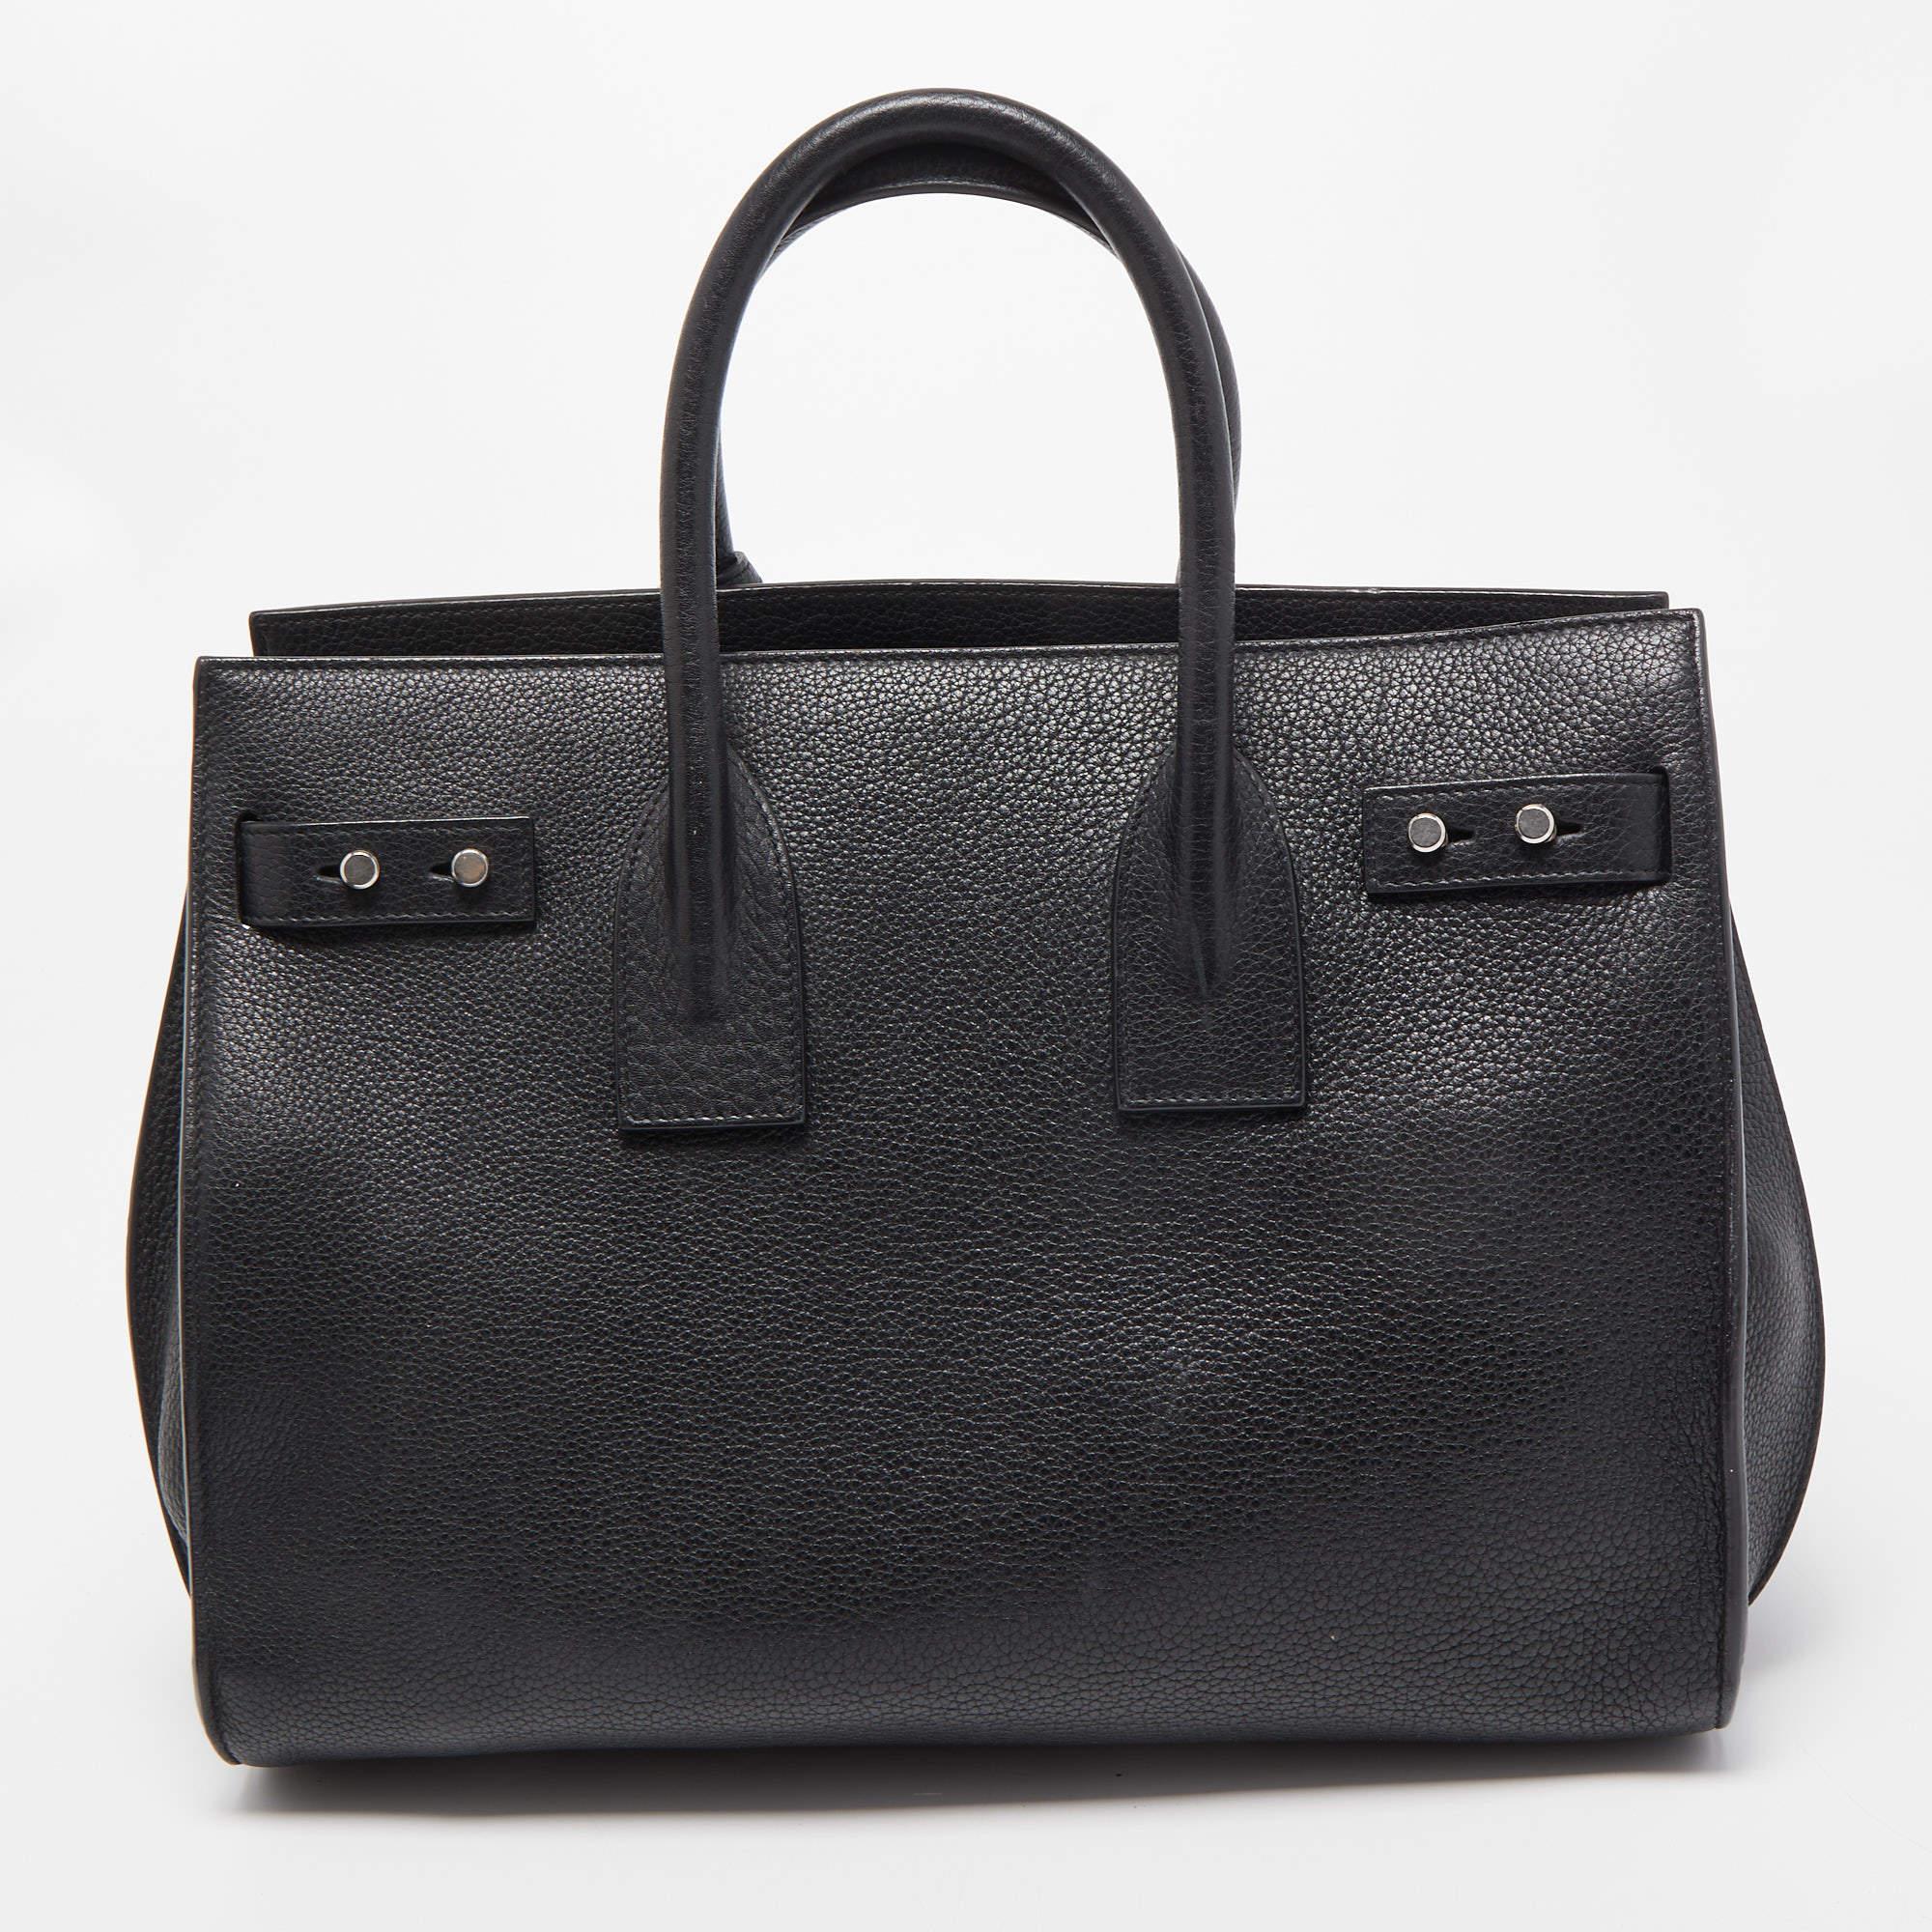 This authentic Saint Laurent tote for women is super classy and functional, perfect for everyday use. We like the simple details and its high-quality finish.

Includes: Detachable Strap, Padlock(no keys)